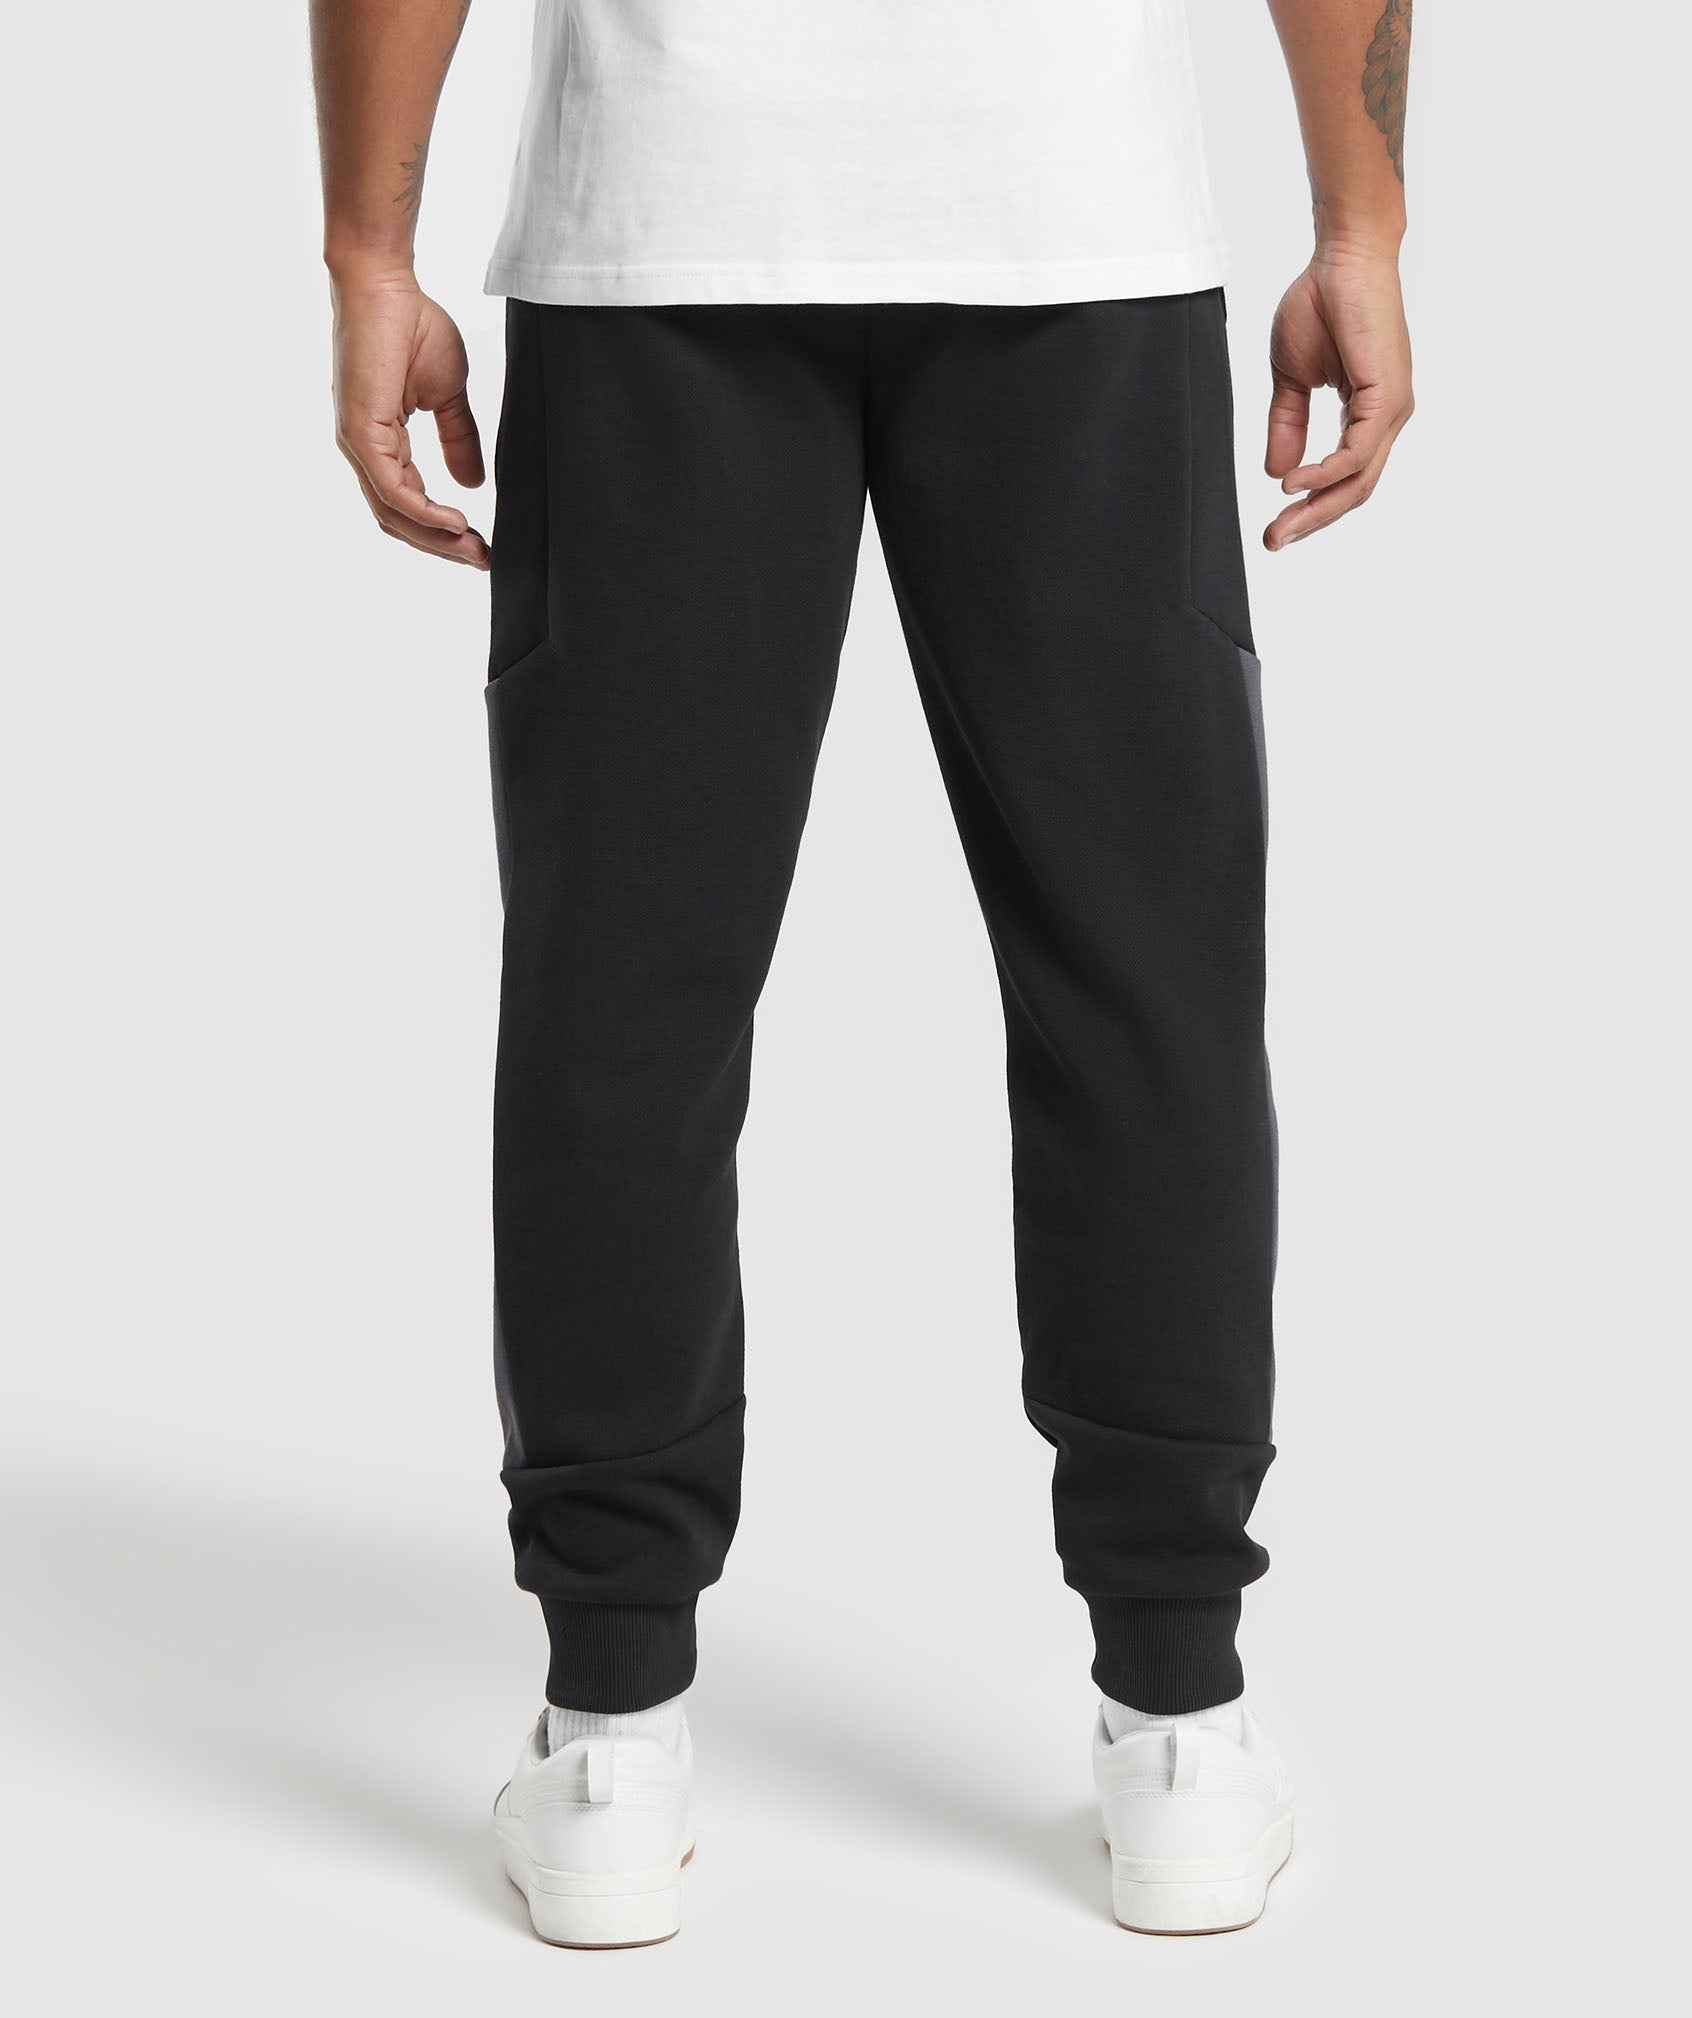 Pique Joggers in Black/Onyx Grey - view 3